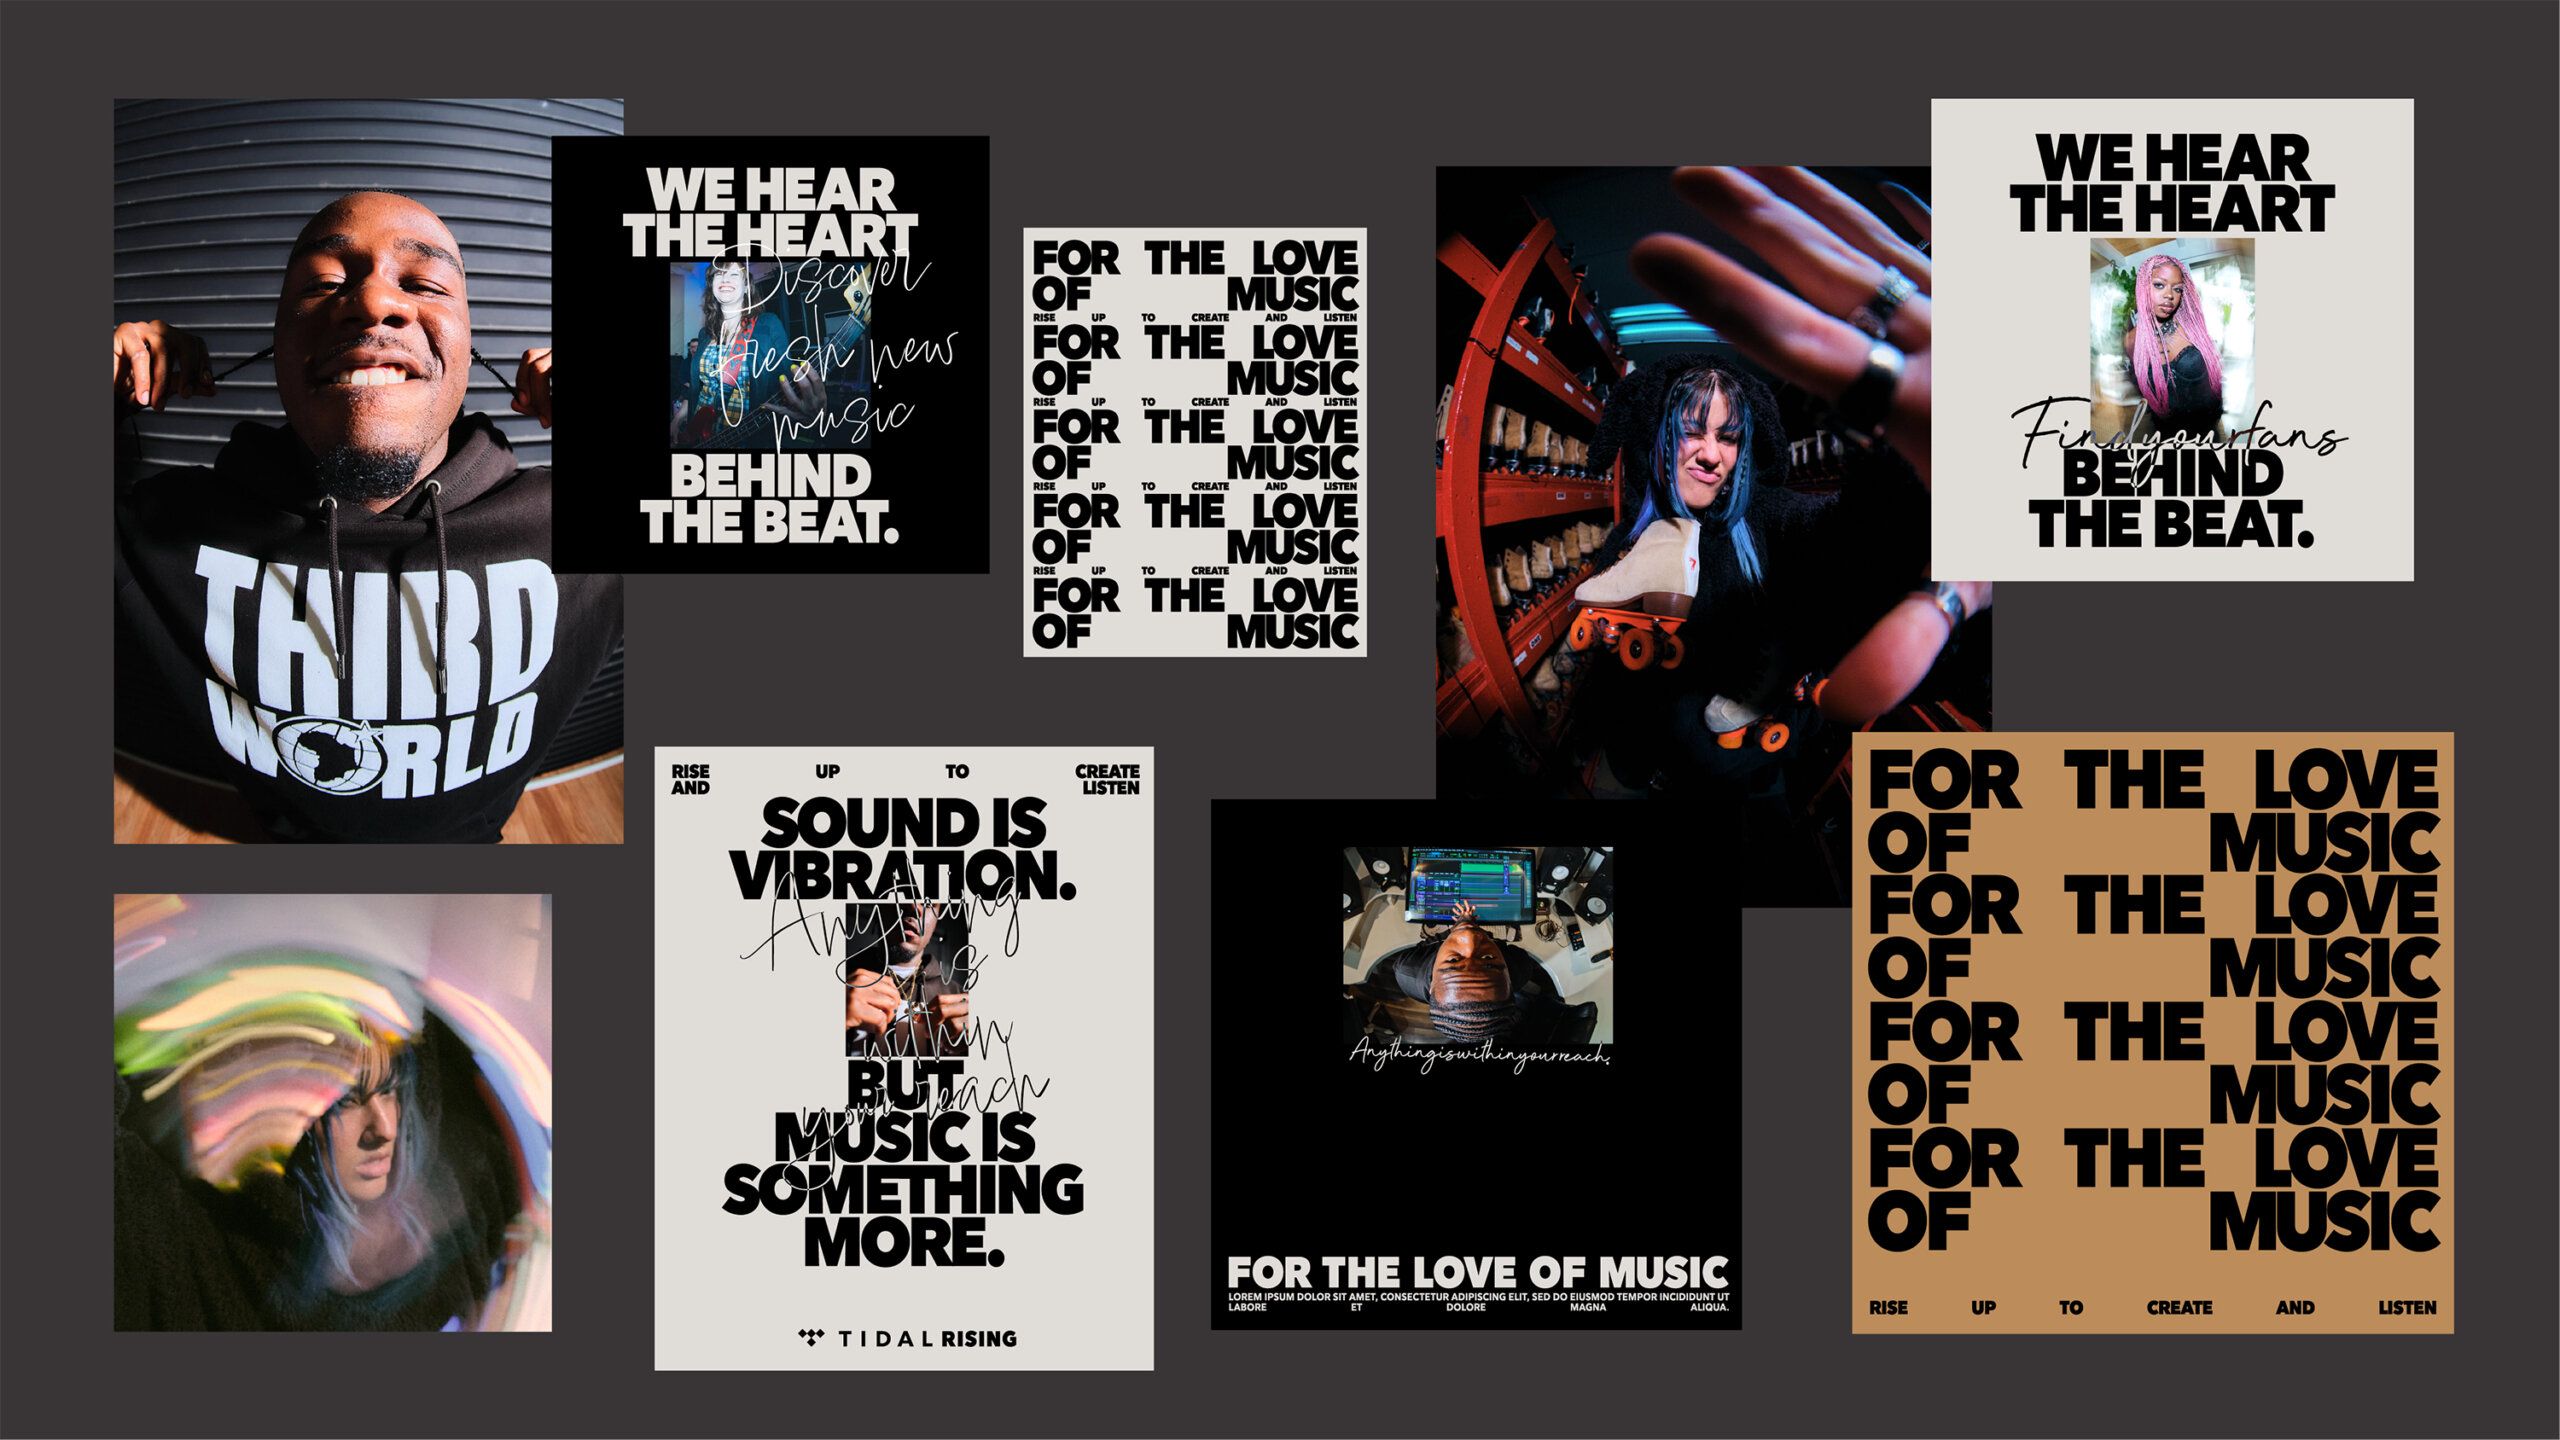 Collage of artist photos and promo tag lines including: We hear heart behind the beat. For the love of music. Rise up to create and listen. Sound is vibration but music is something more.